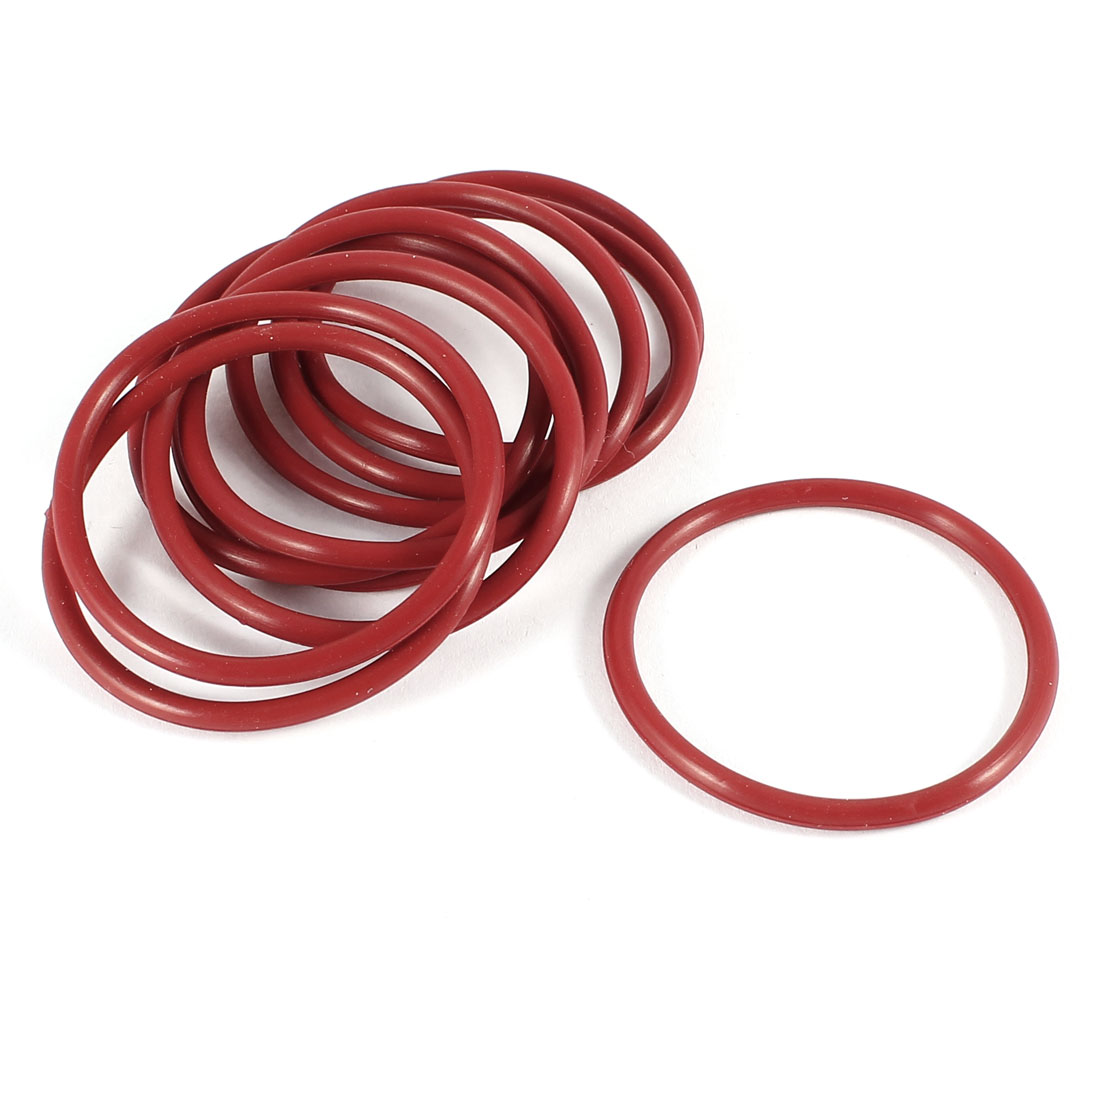 Unique Bargains 10 Pcs 40mm Inner Dia 3mm Thick Red Rubber O Ring Seal Grommets